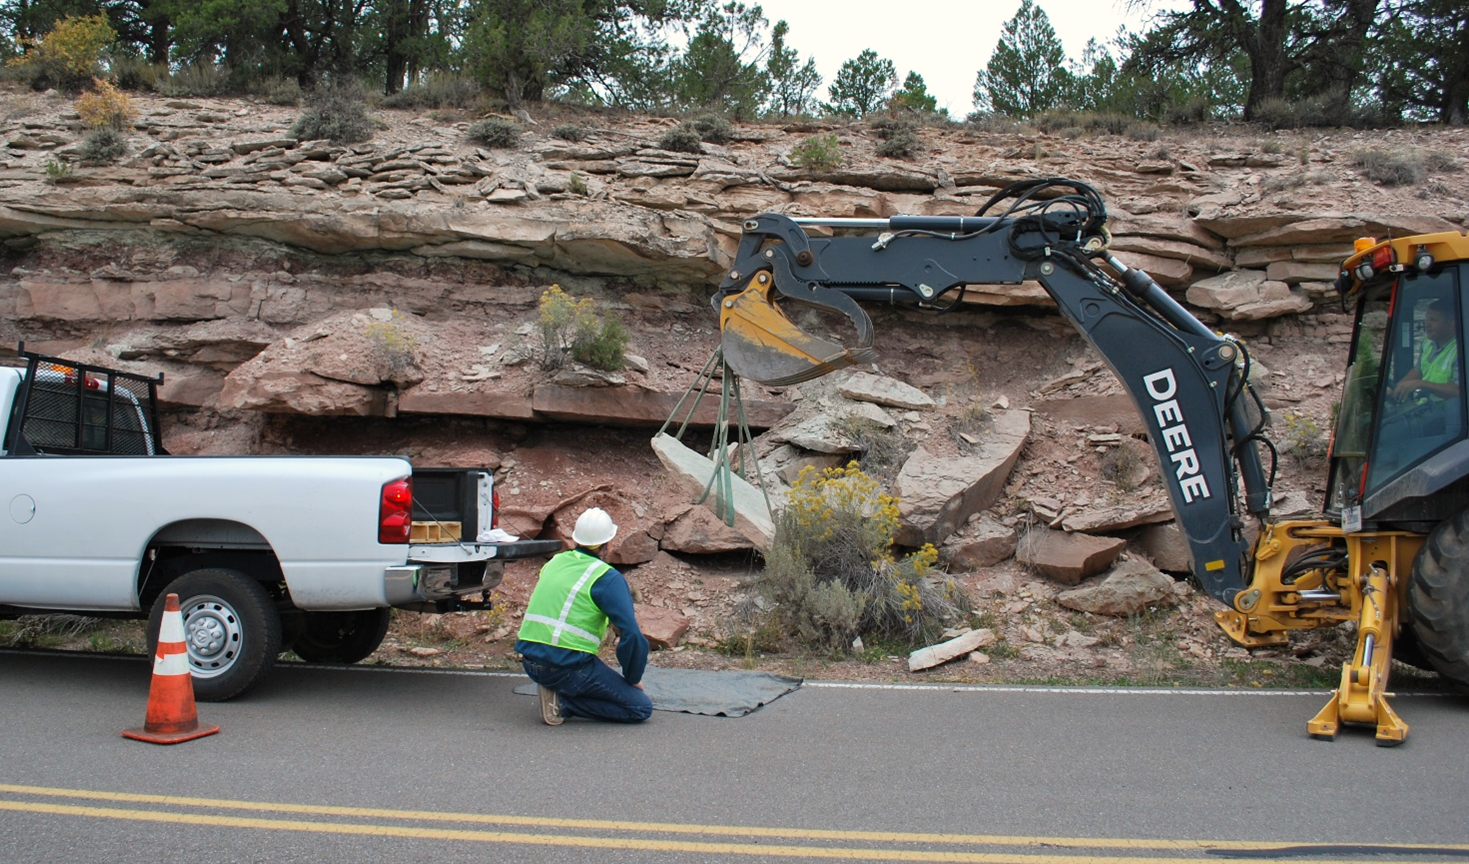 Pickup truck and backhoe with workers move boulder at the base of a roadside bluff.